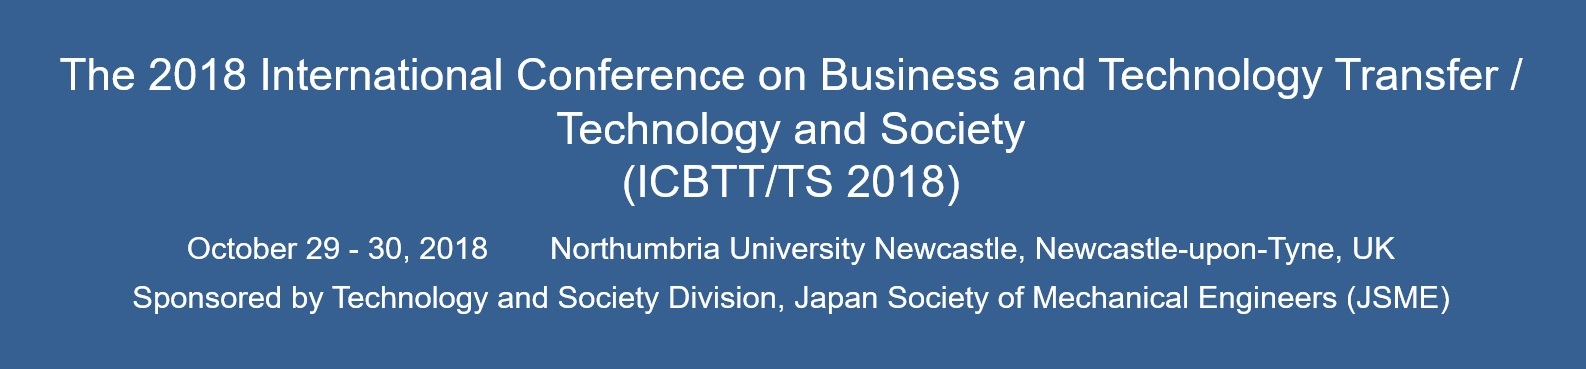 The 2018 International Conference on Business and Technology Transfer / Technology and Society (ICBTT/TS 2018)